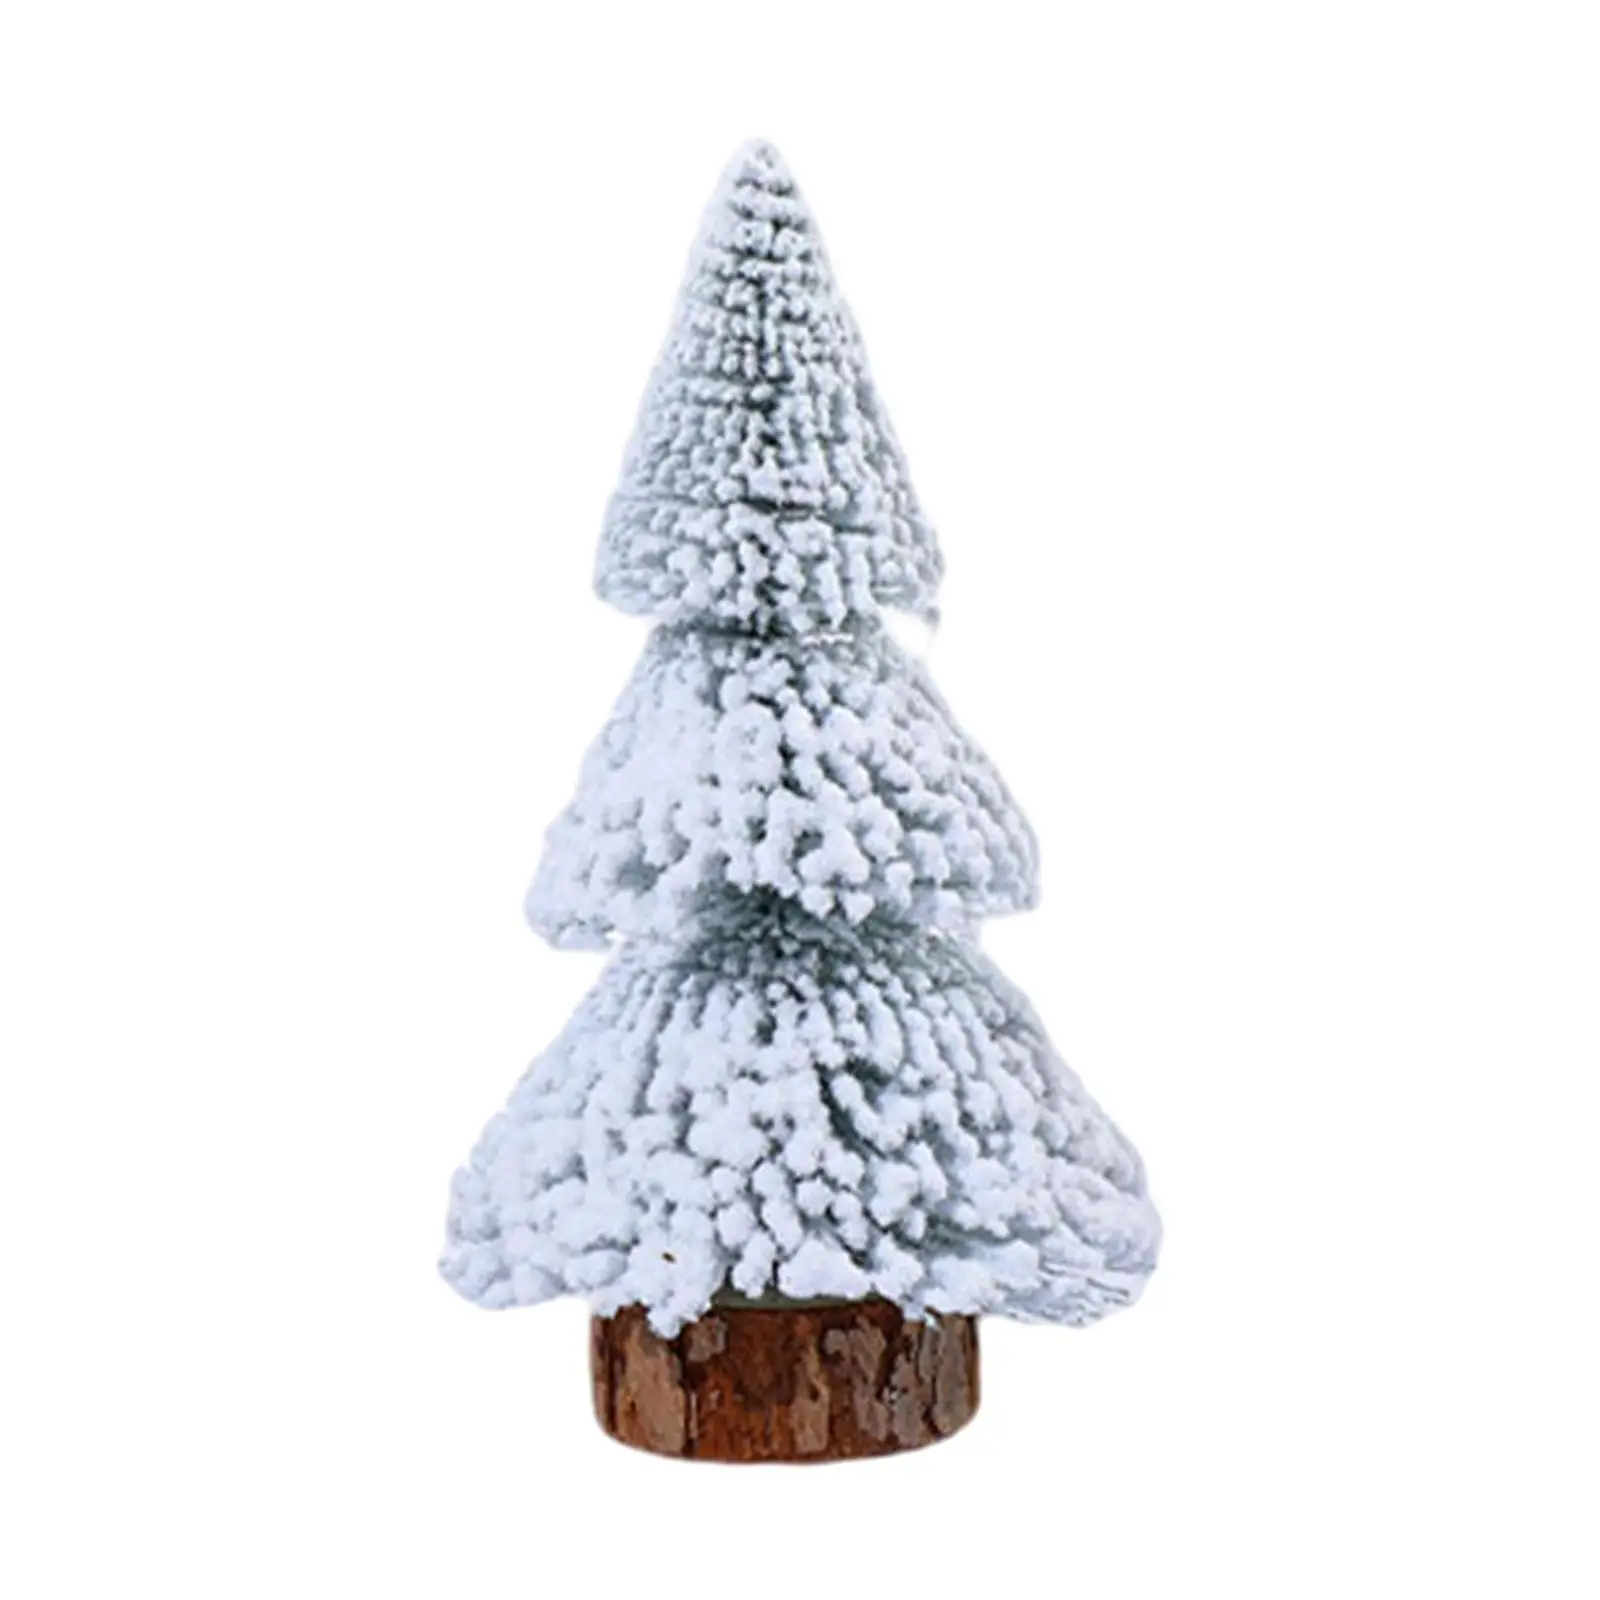 Mini Xmas Tree Table Centerpiece Decorative Party Rustic Small Snow Flocked Christmas Tree for Shelf Fireplace Home Holiday Desk